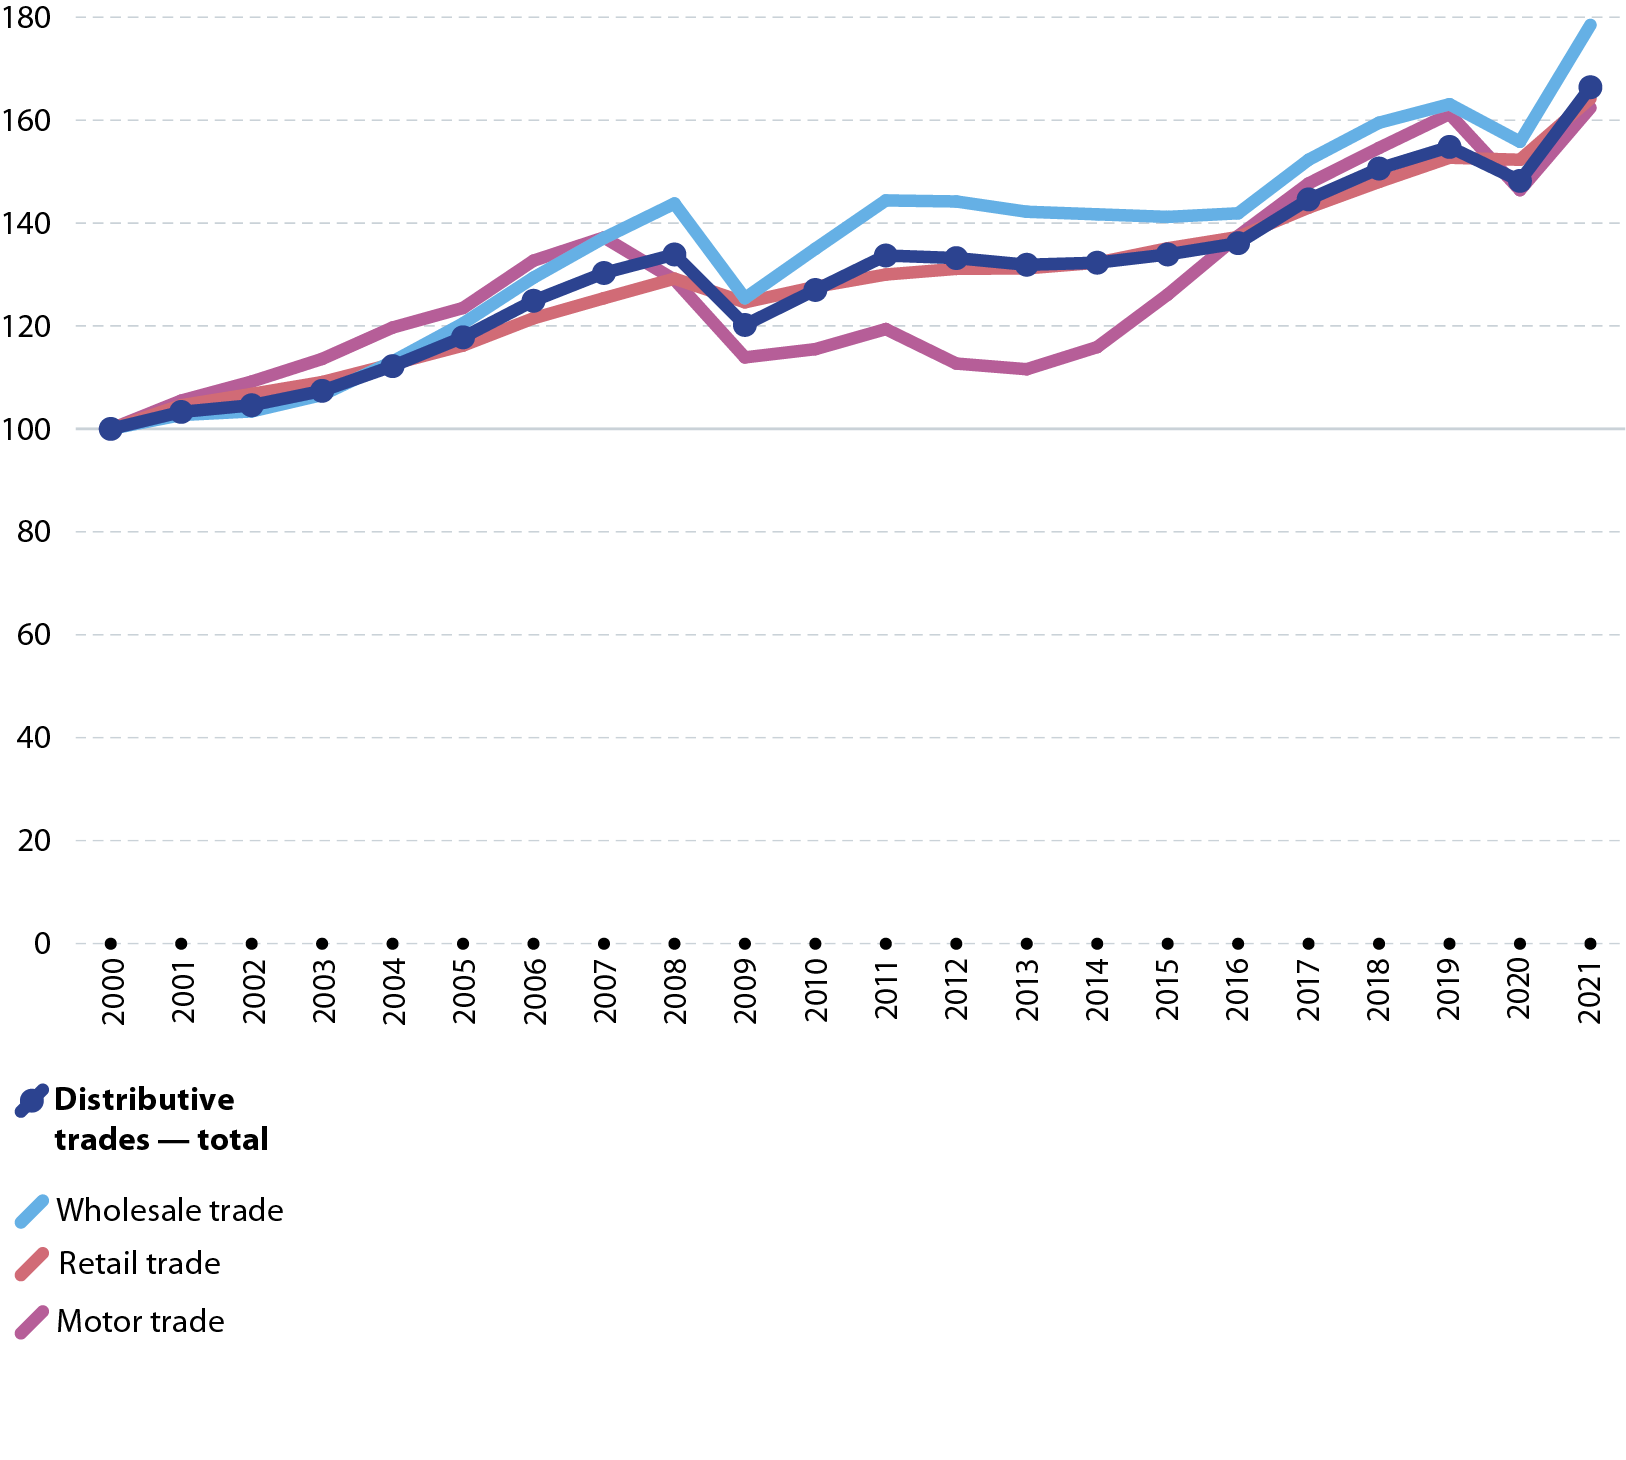 Turnover index. Data for the EU. Annual data for 2000 to 2021. Distributive trades total and three NACE divisions. Line graph.